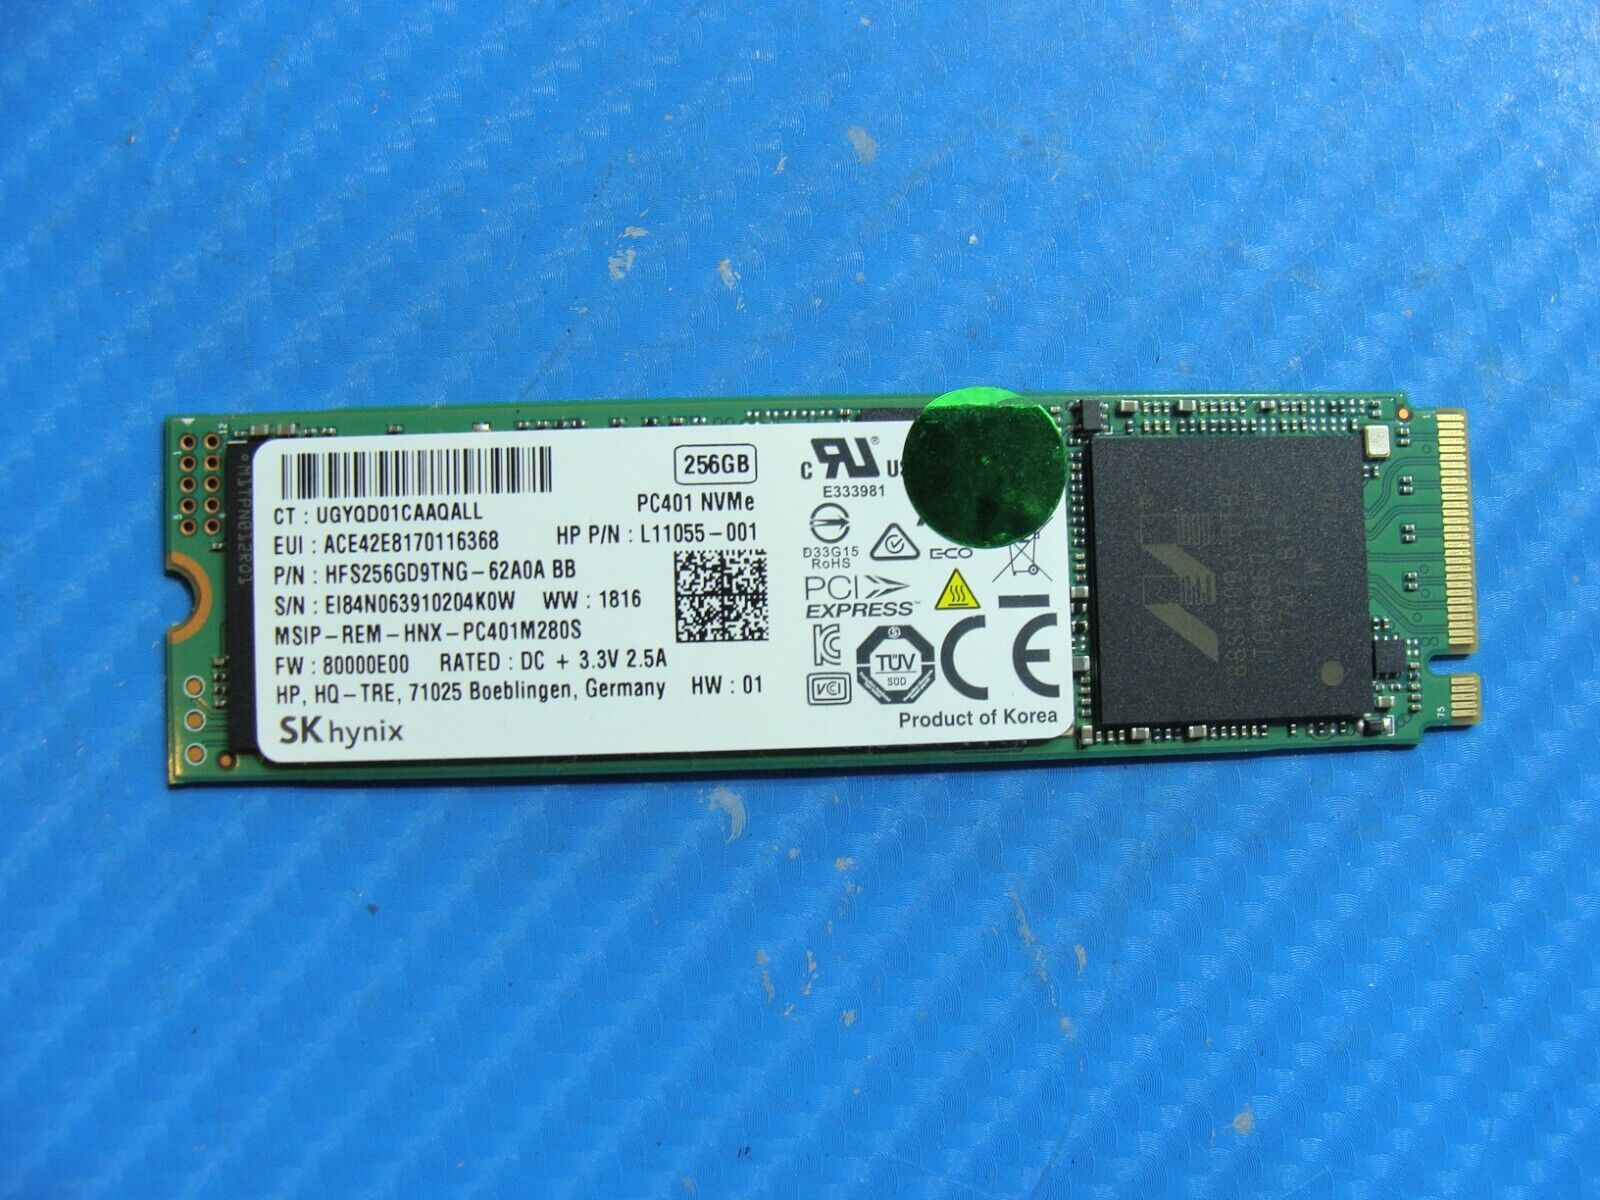 HP 470 G5 SK Hynix 256GB NVMe M.2 SSD Solid State Drive HFS256GD9TNG-62A0A